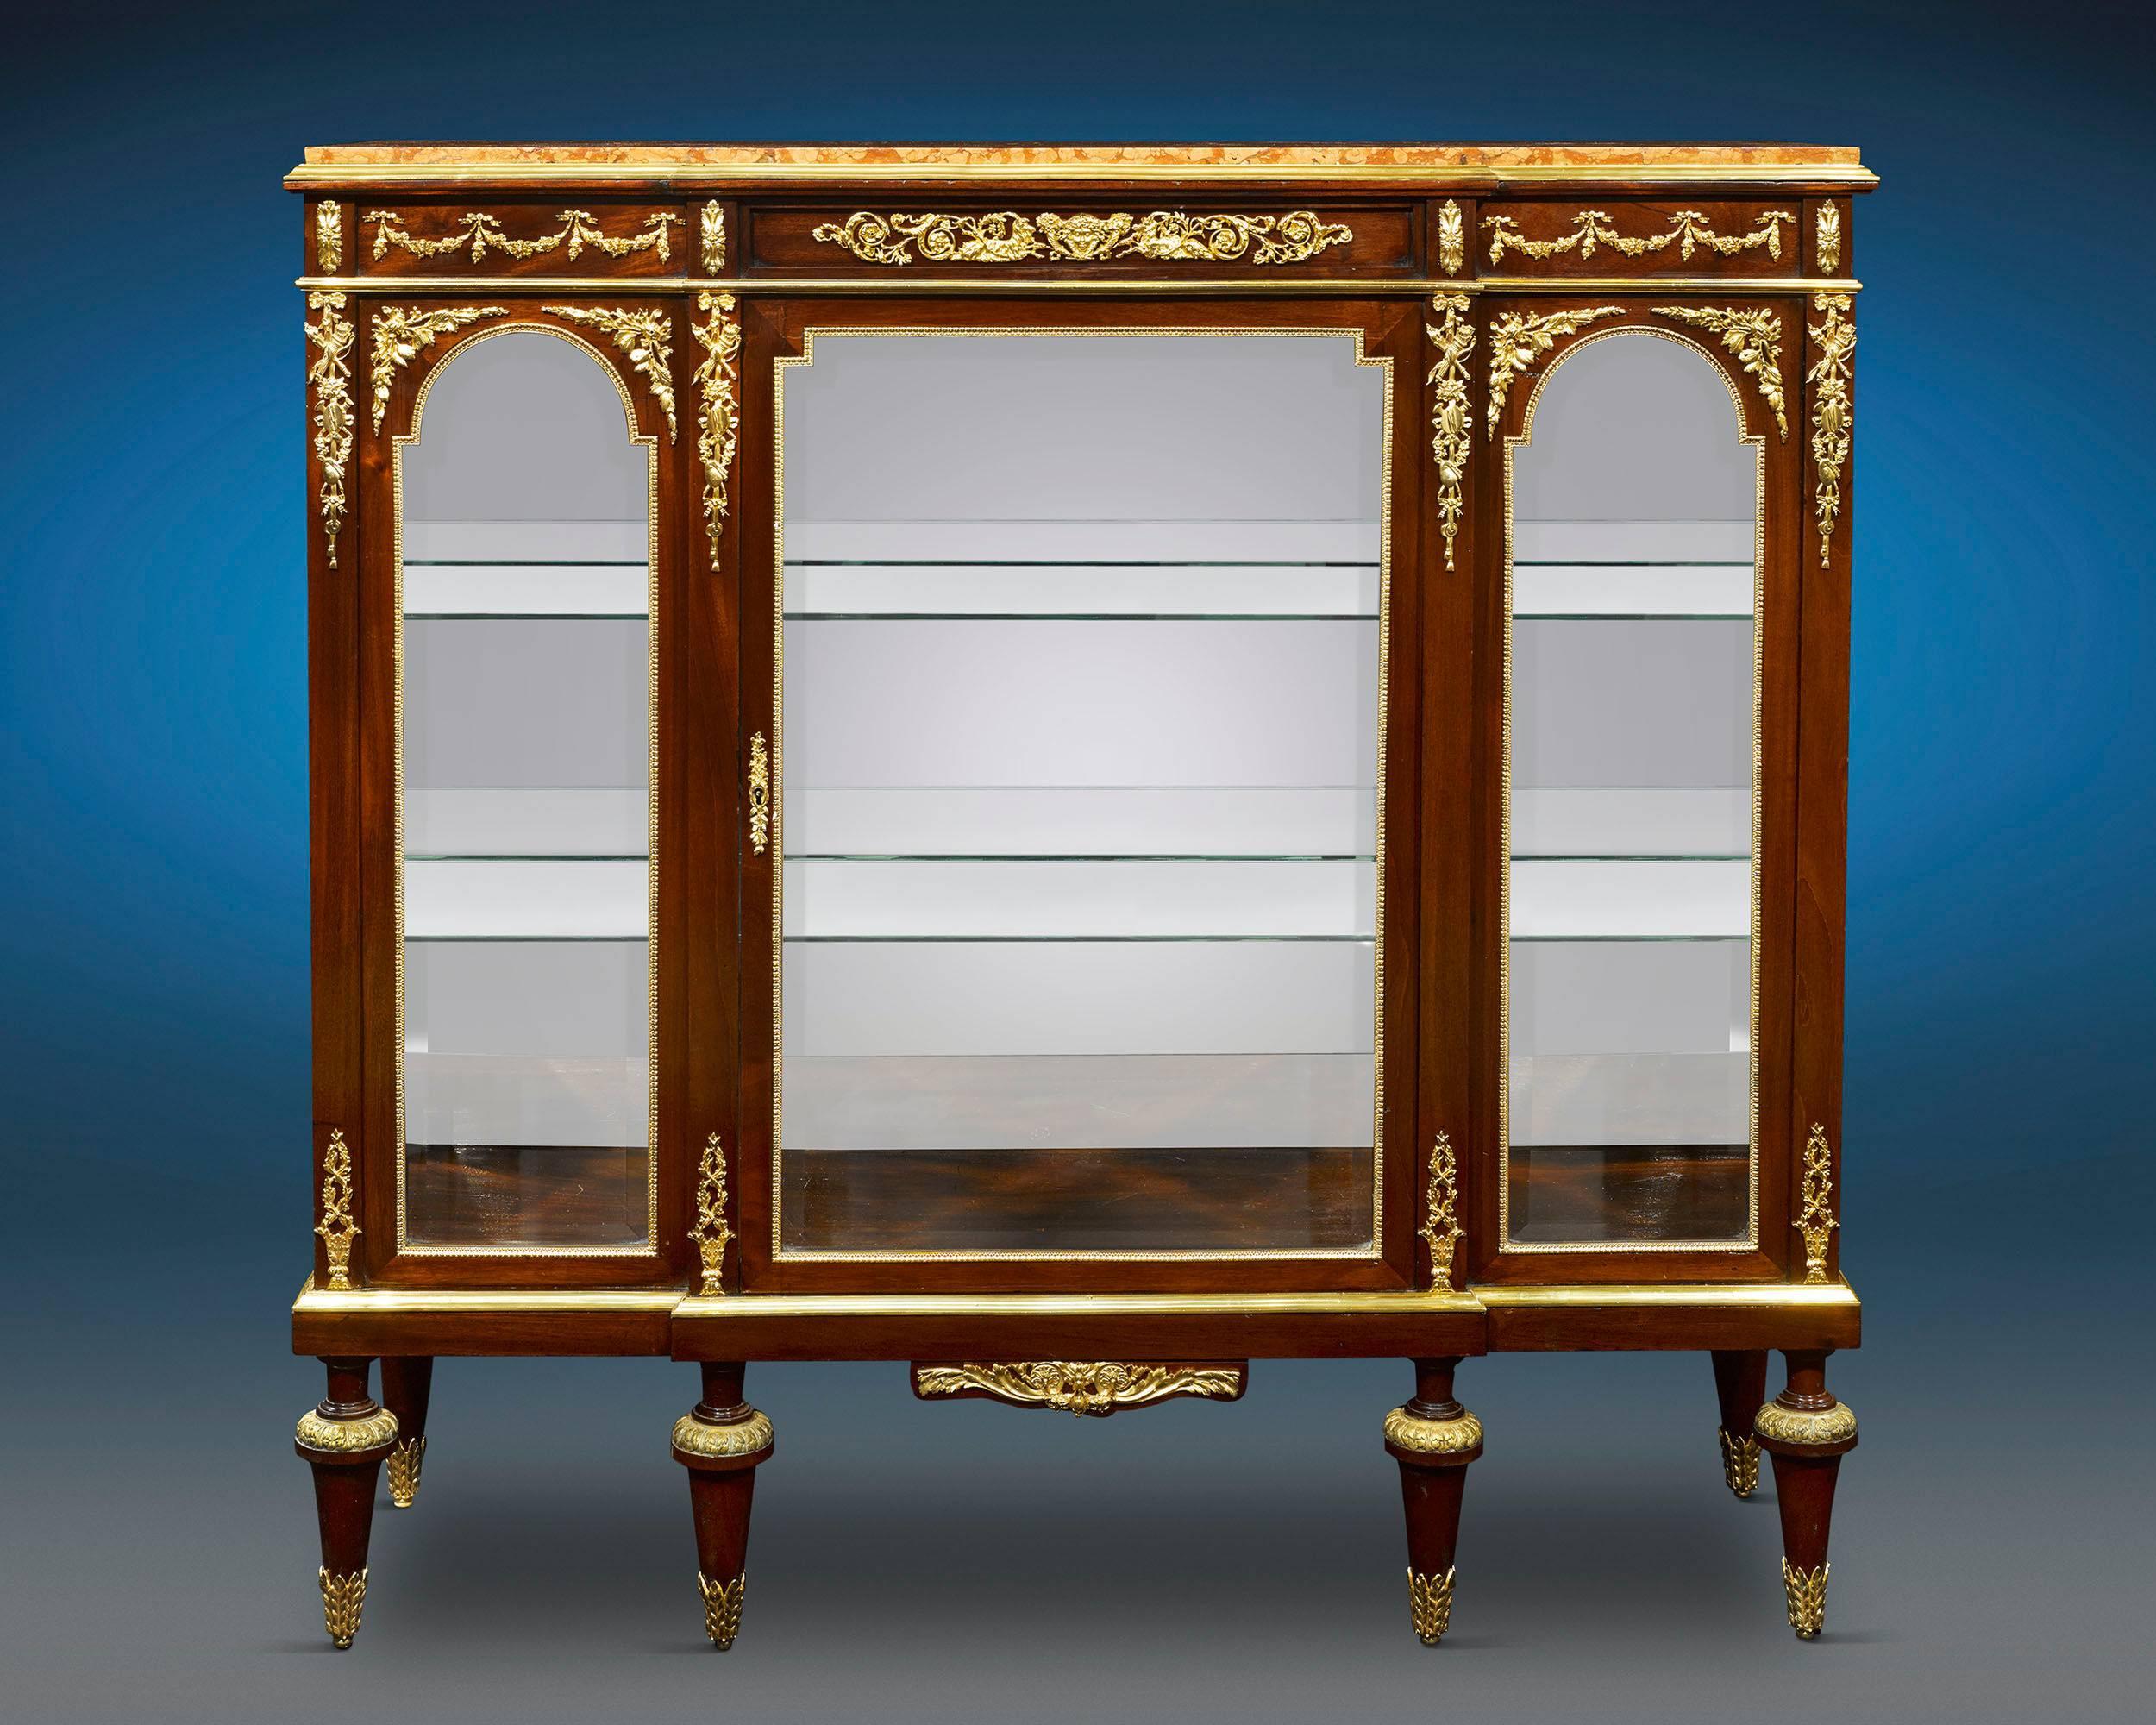 Fashioned in the Louis XVI style, this magnificent glass credenza has an opulent, yet classical feel. Crafted of luxurious mahogany, the extraordinary piece is bedecked with lavish ormolu mounts that beautifully accent the wood's rich hue. French